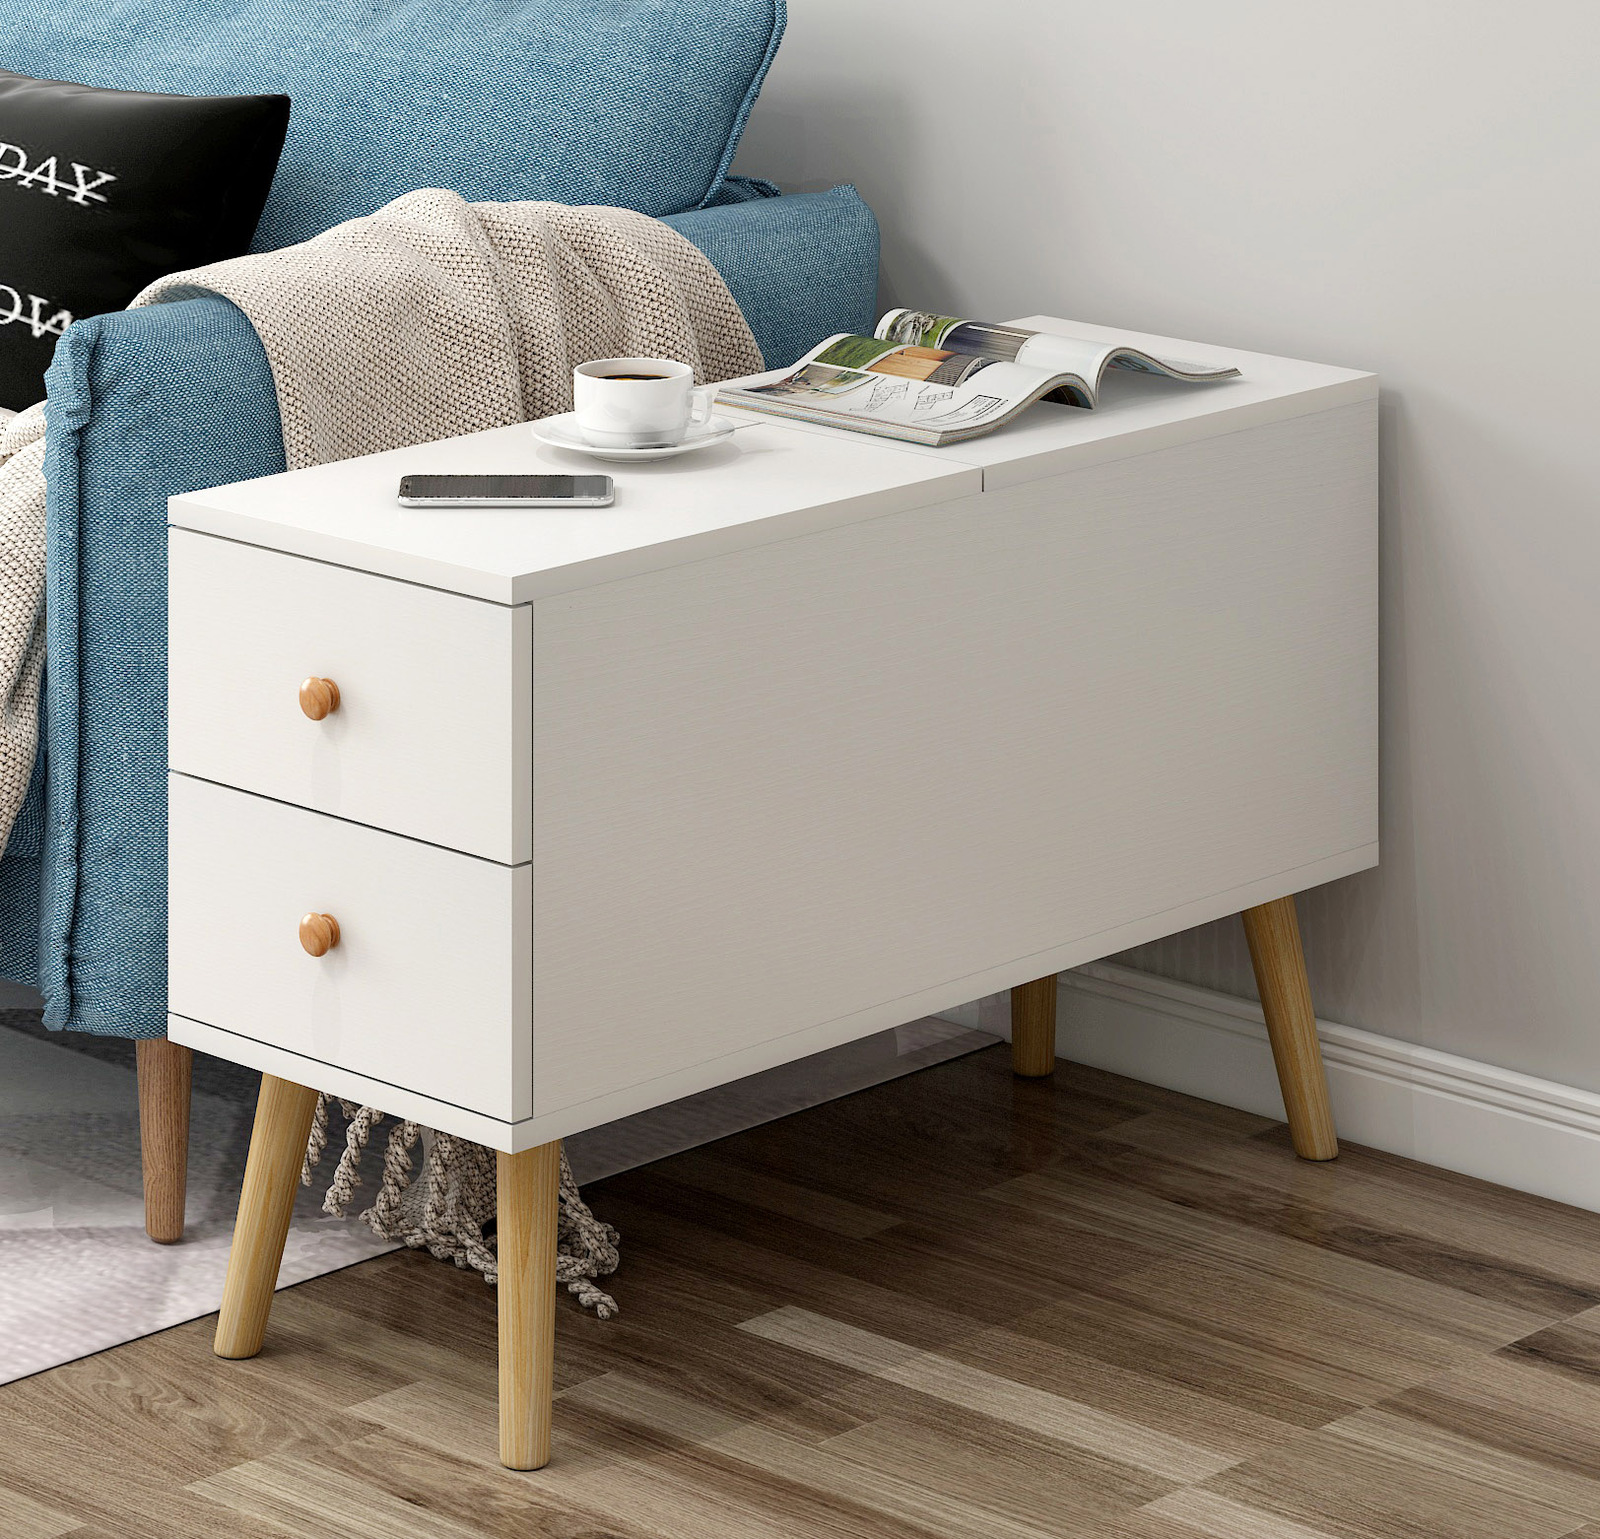 Atlantic Lift Storage Coffee Table with Drawers (White) - 80cm